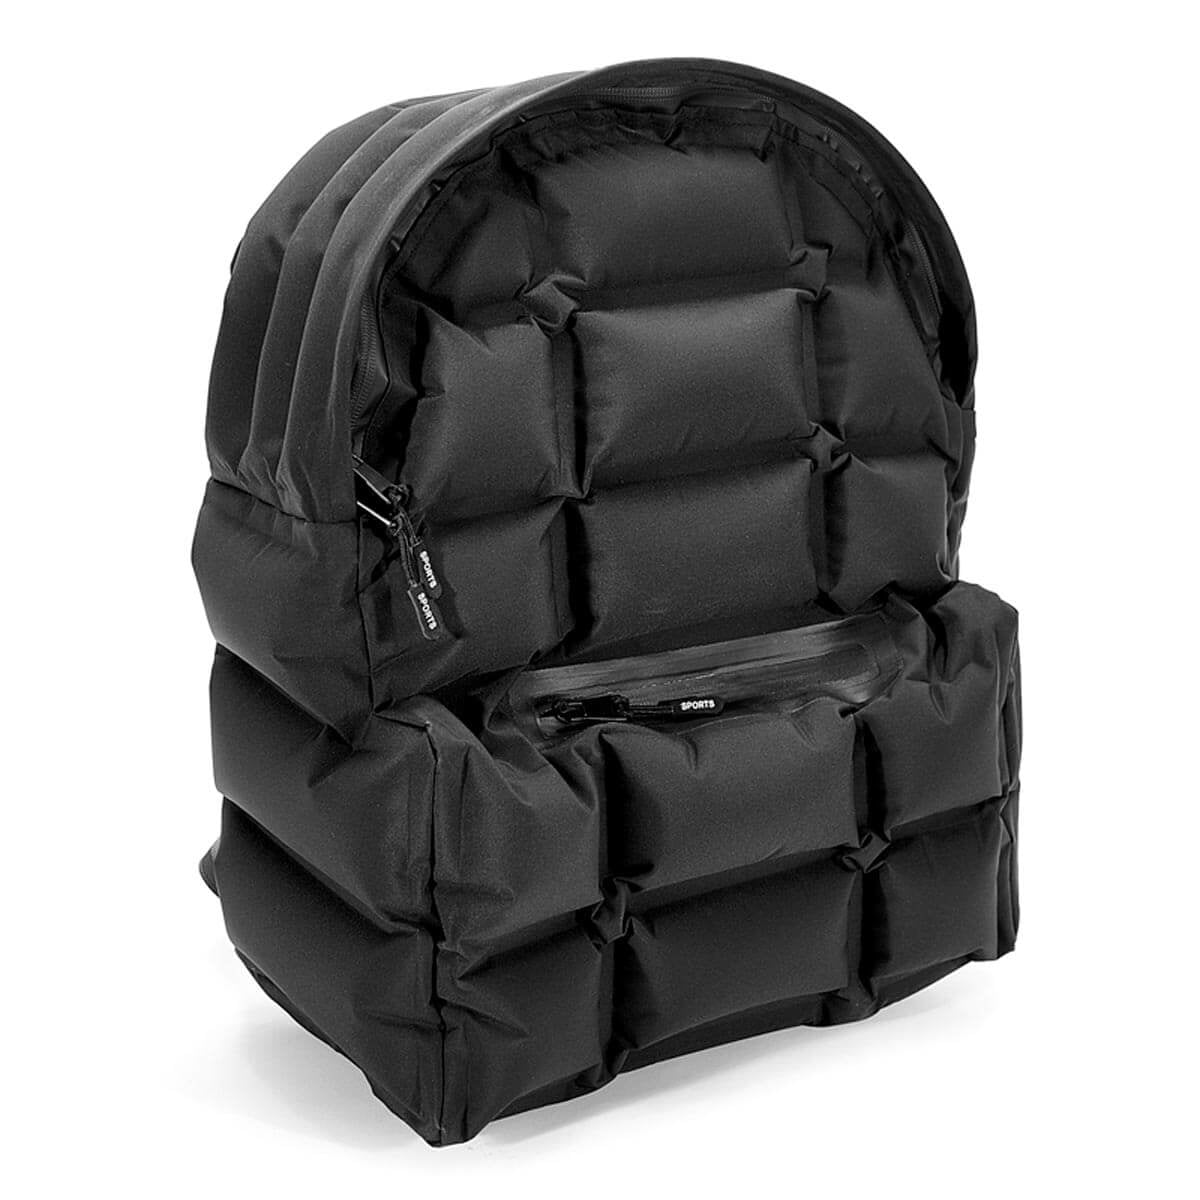 Soft Bubble Air-tight Lightweight Fashion Black Backpacks